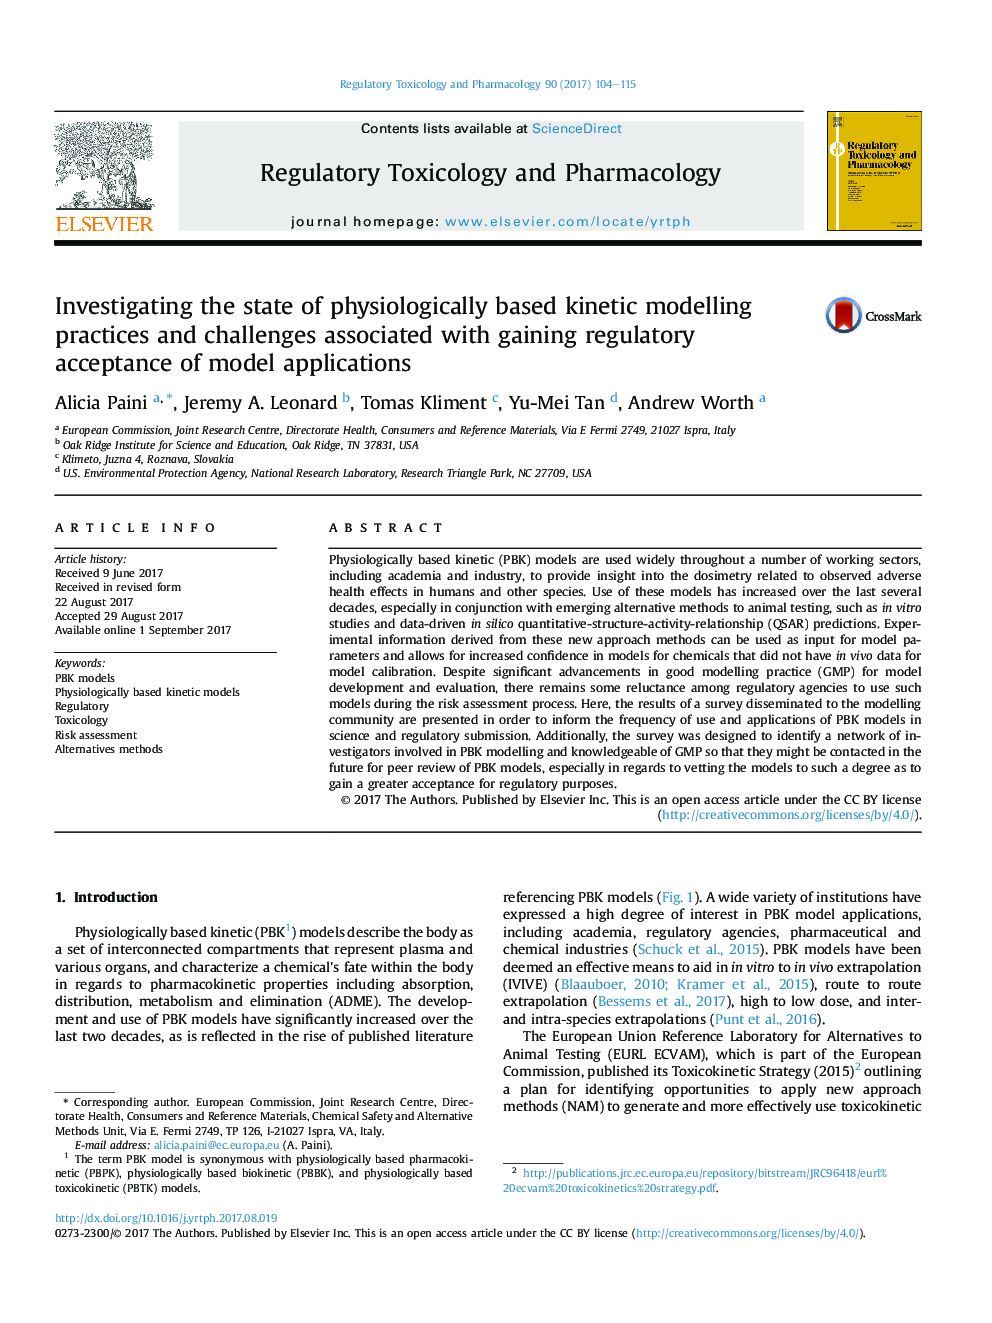 Investigating the state of physiologically based kinetic modelling practices and challenges associated with gaining regulatory acceptance of model applications